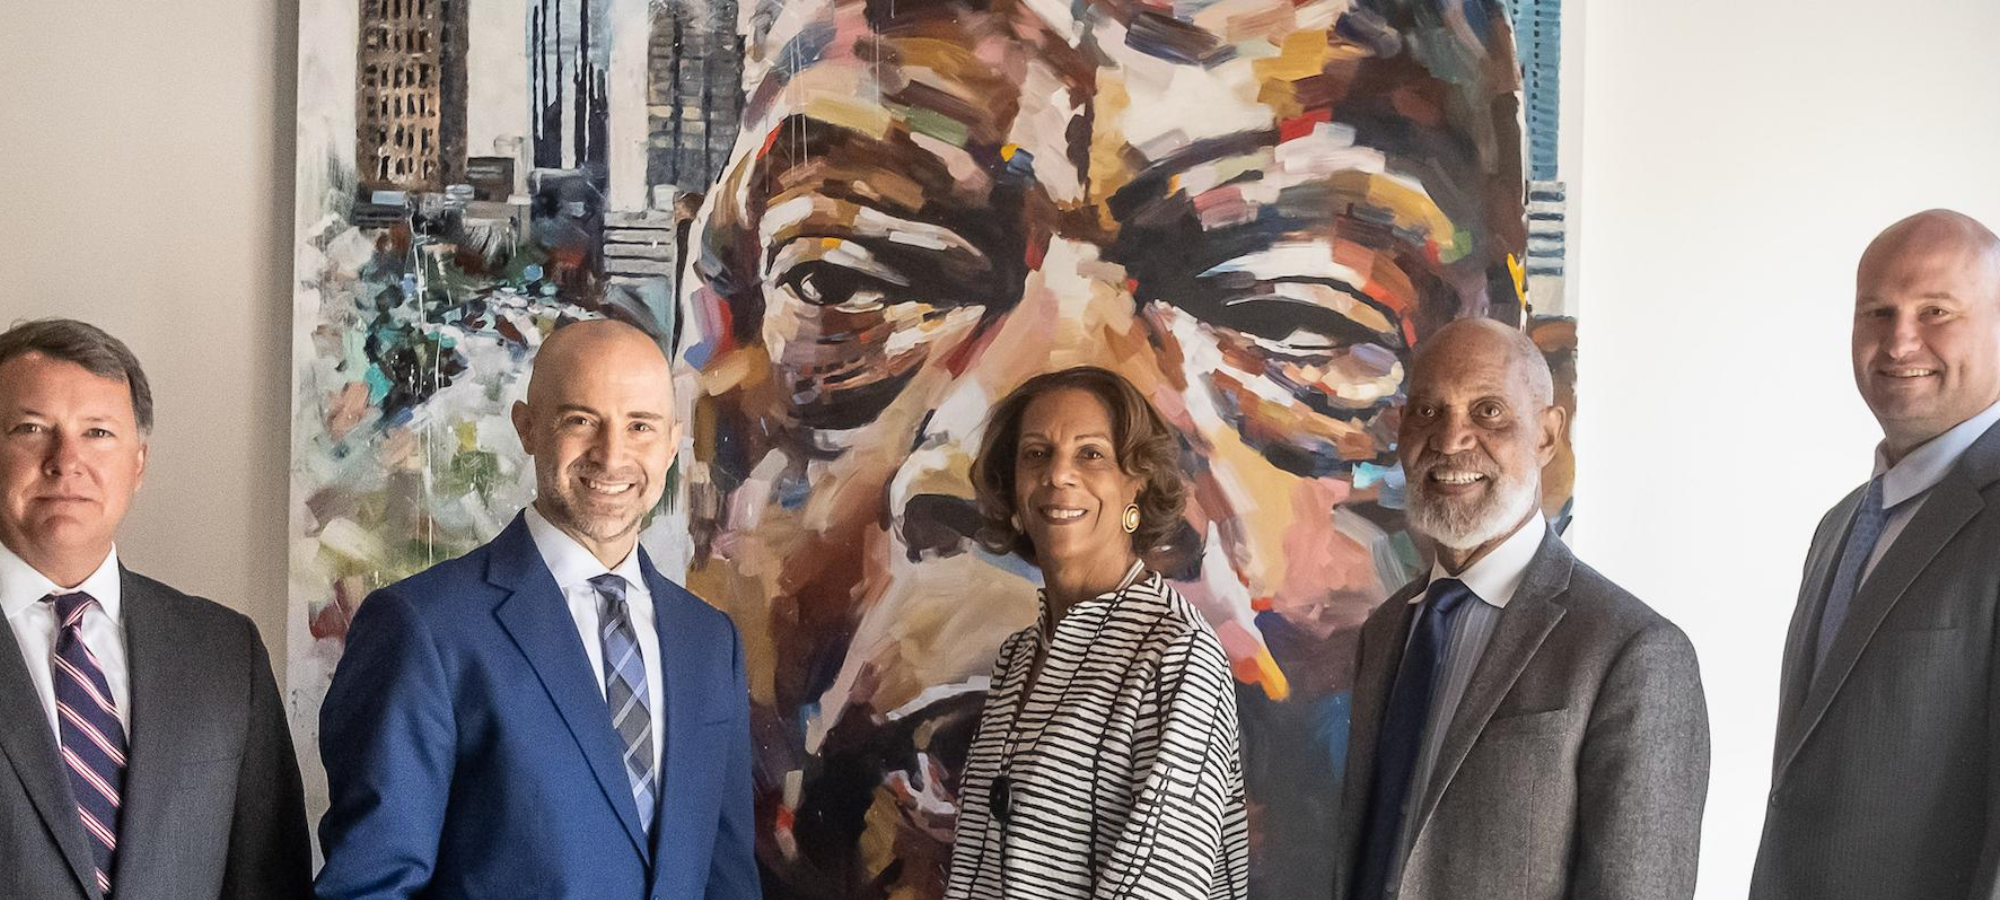 Brookhaven Law Office Honors John Lewis with Commissioned Portrait